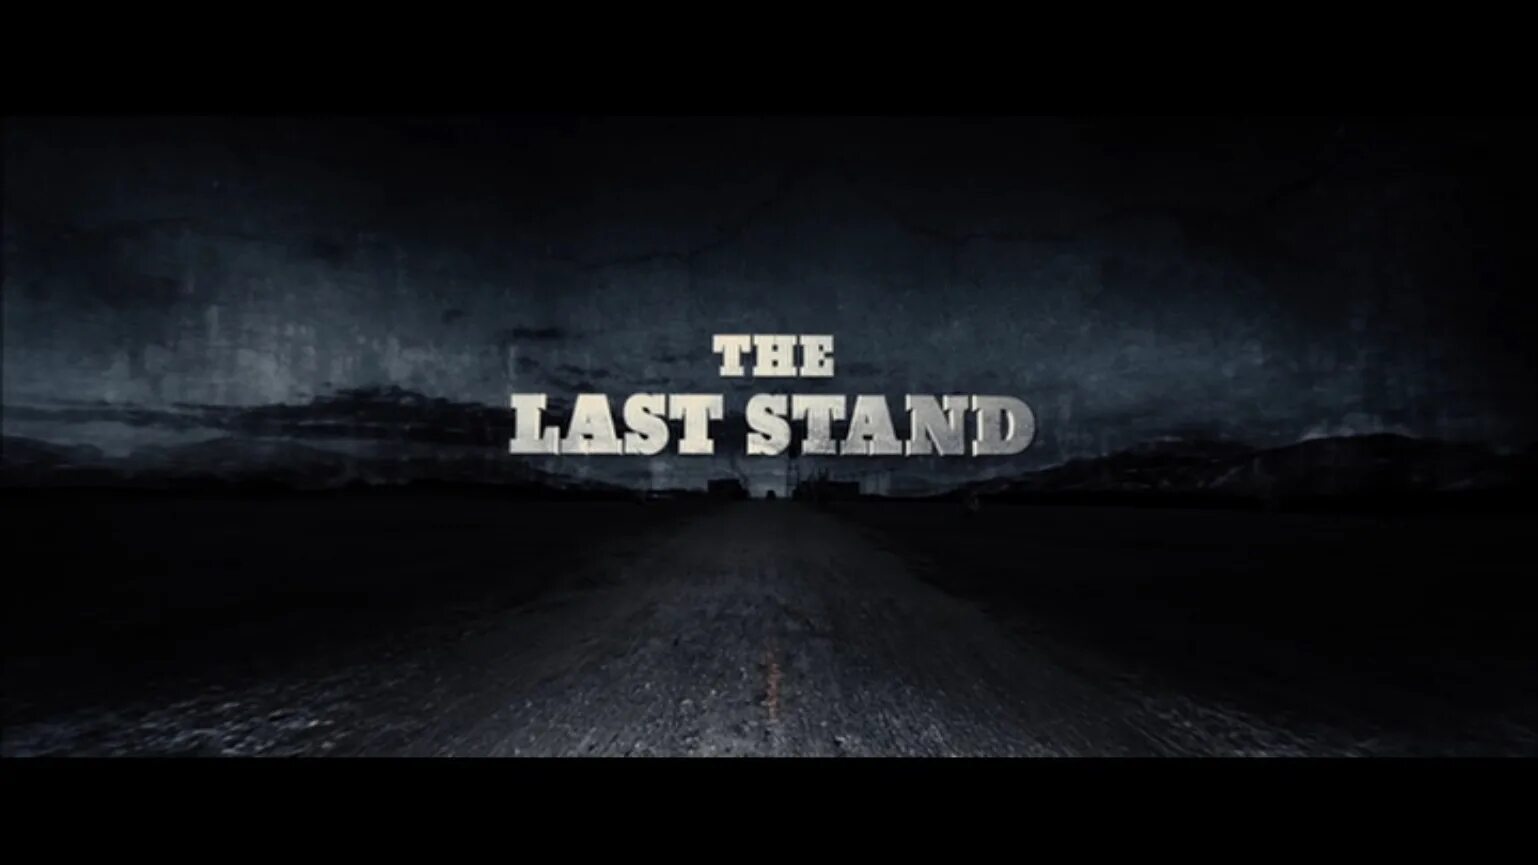 The last Stand. Сабатон зе ласт стенд. The last Stand 2013. Gojo last stand